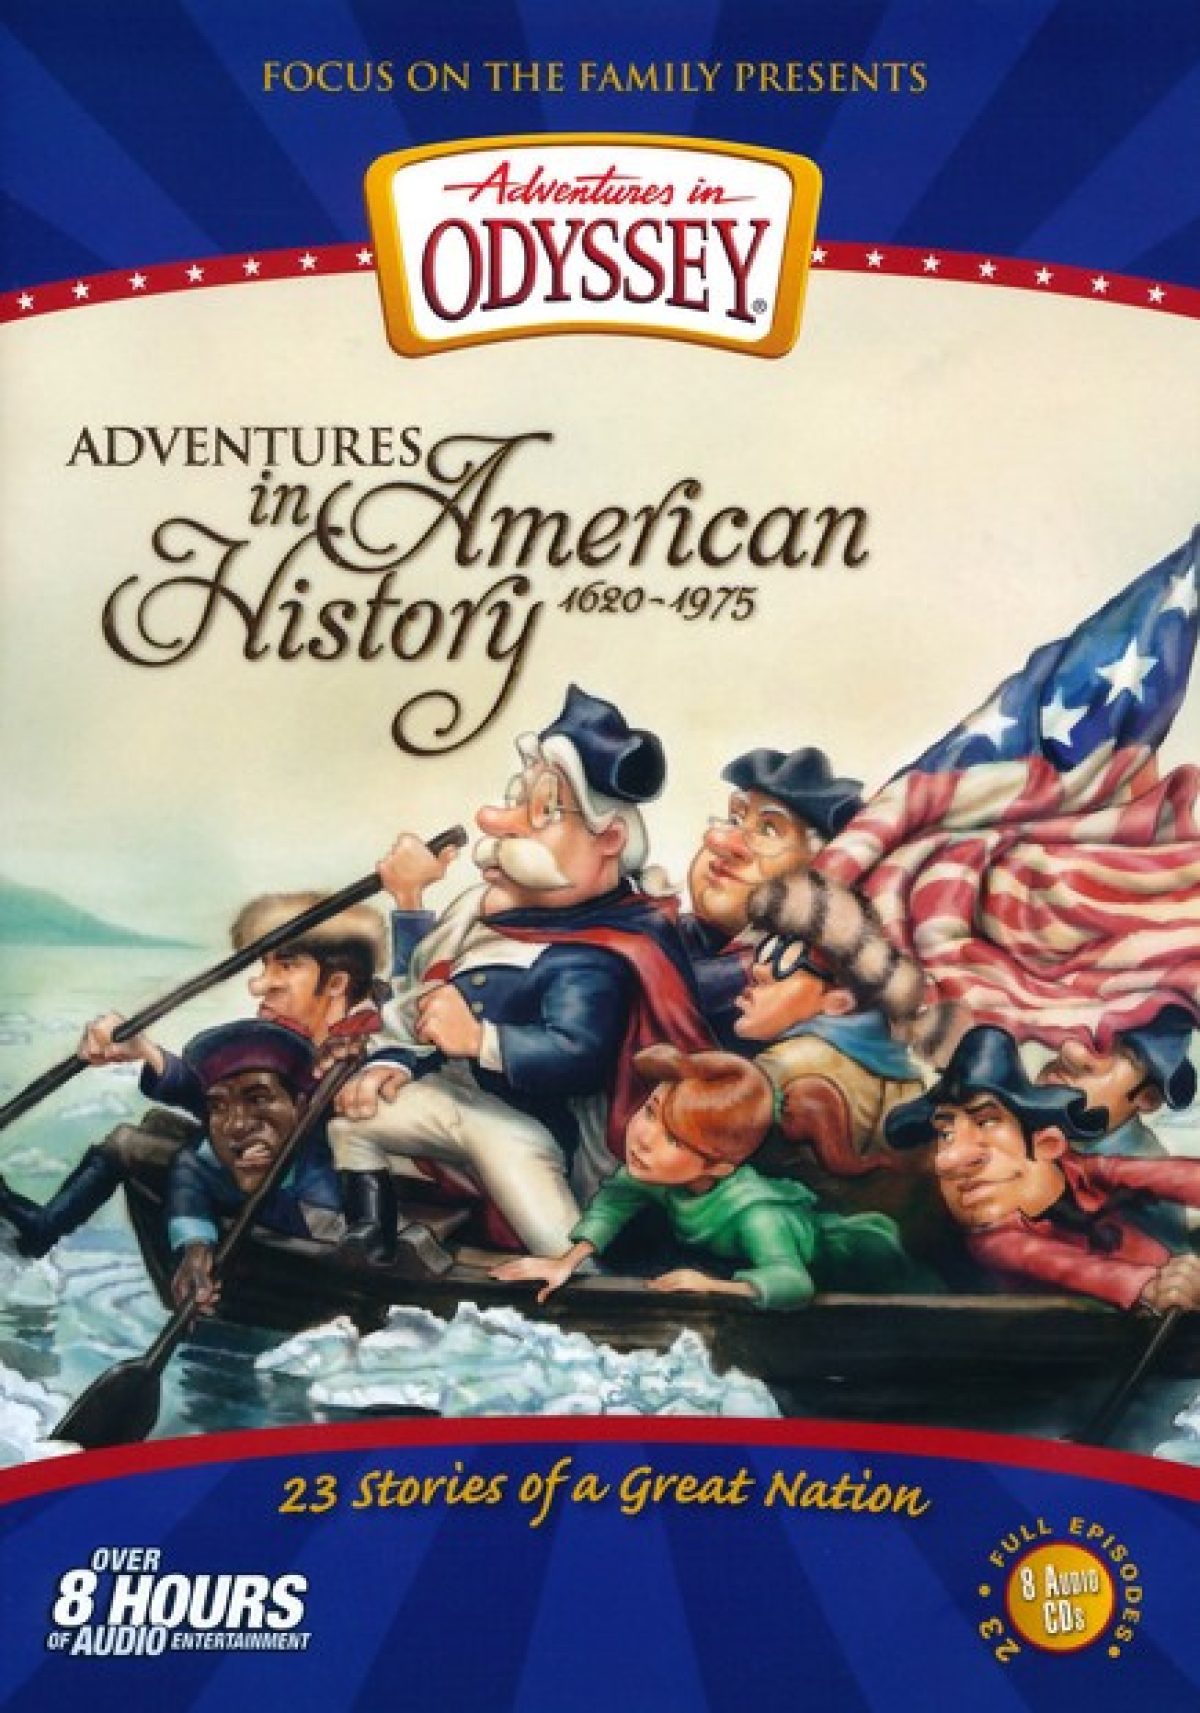 adventures in odyssey american history compilation 23 stories on 8 cds